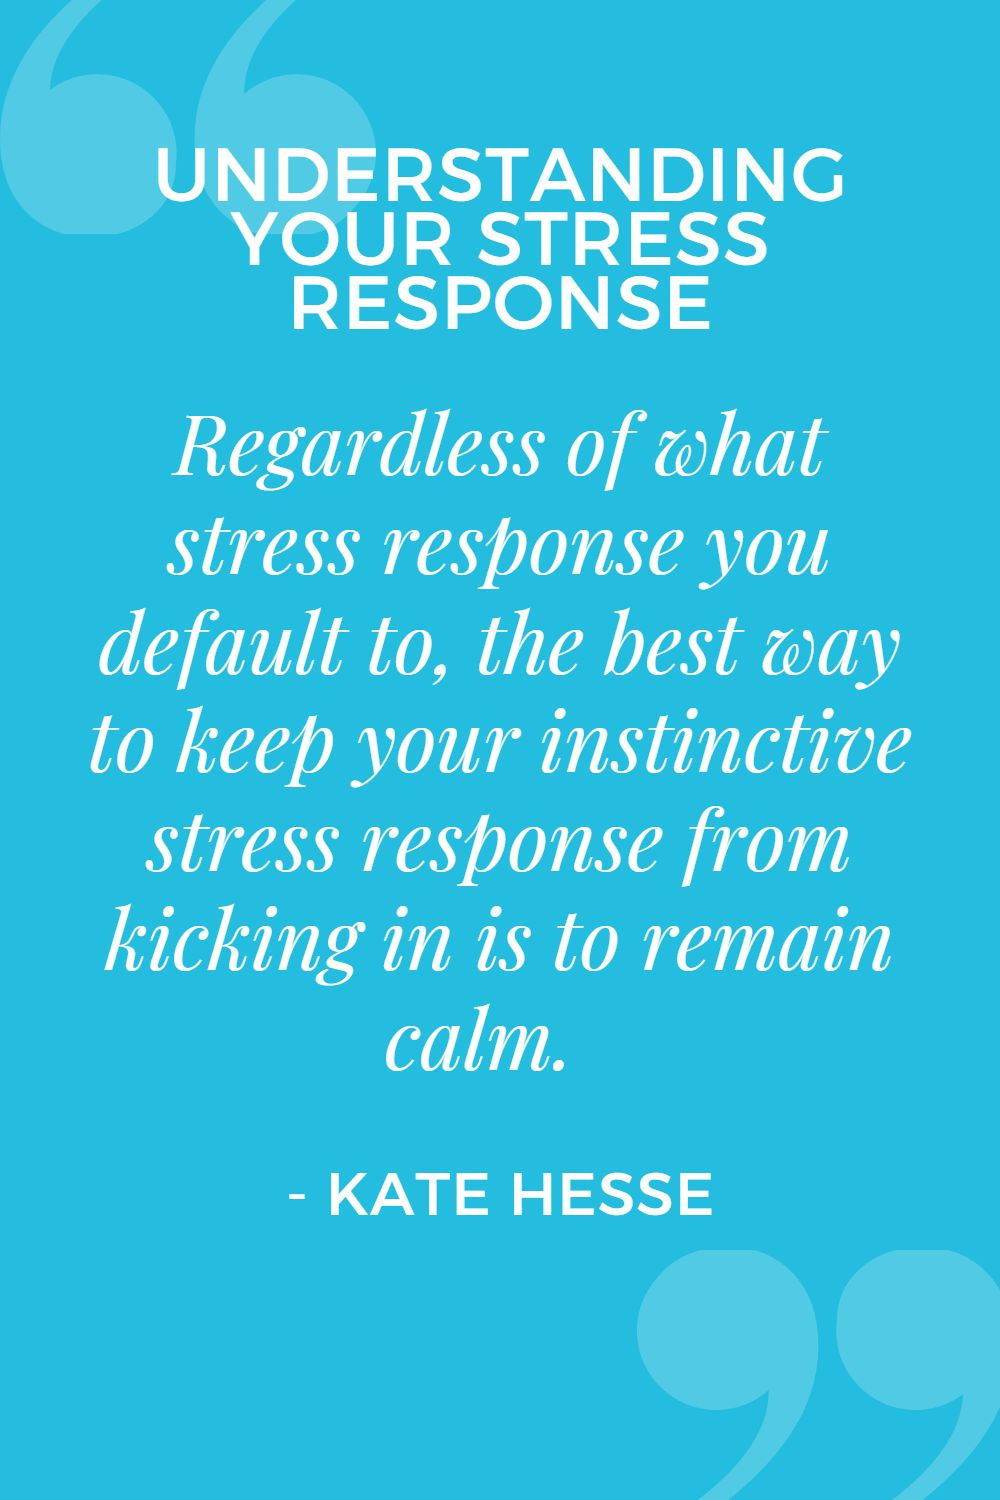 Regardless of what stress response you default to, the best way to keep your instinctive stress response from kicking in is to remain calm.